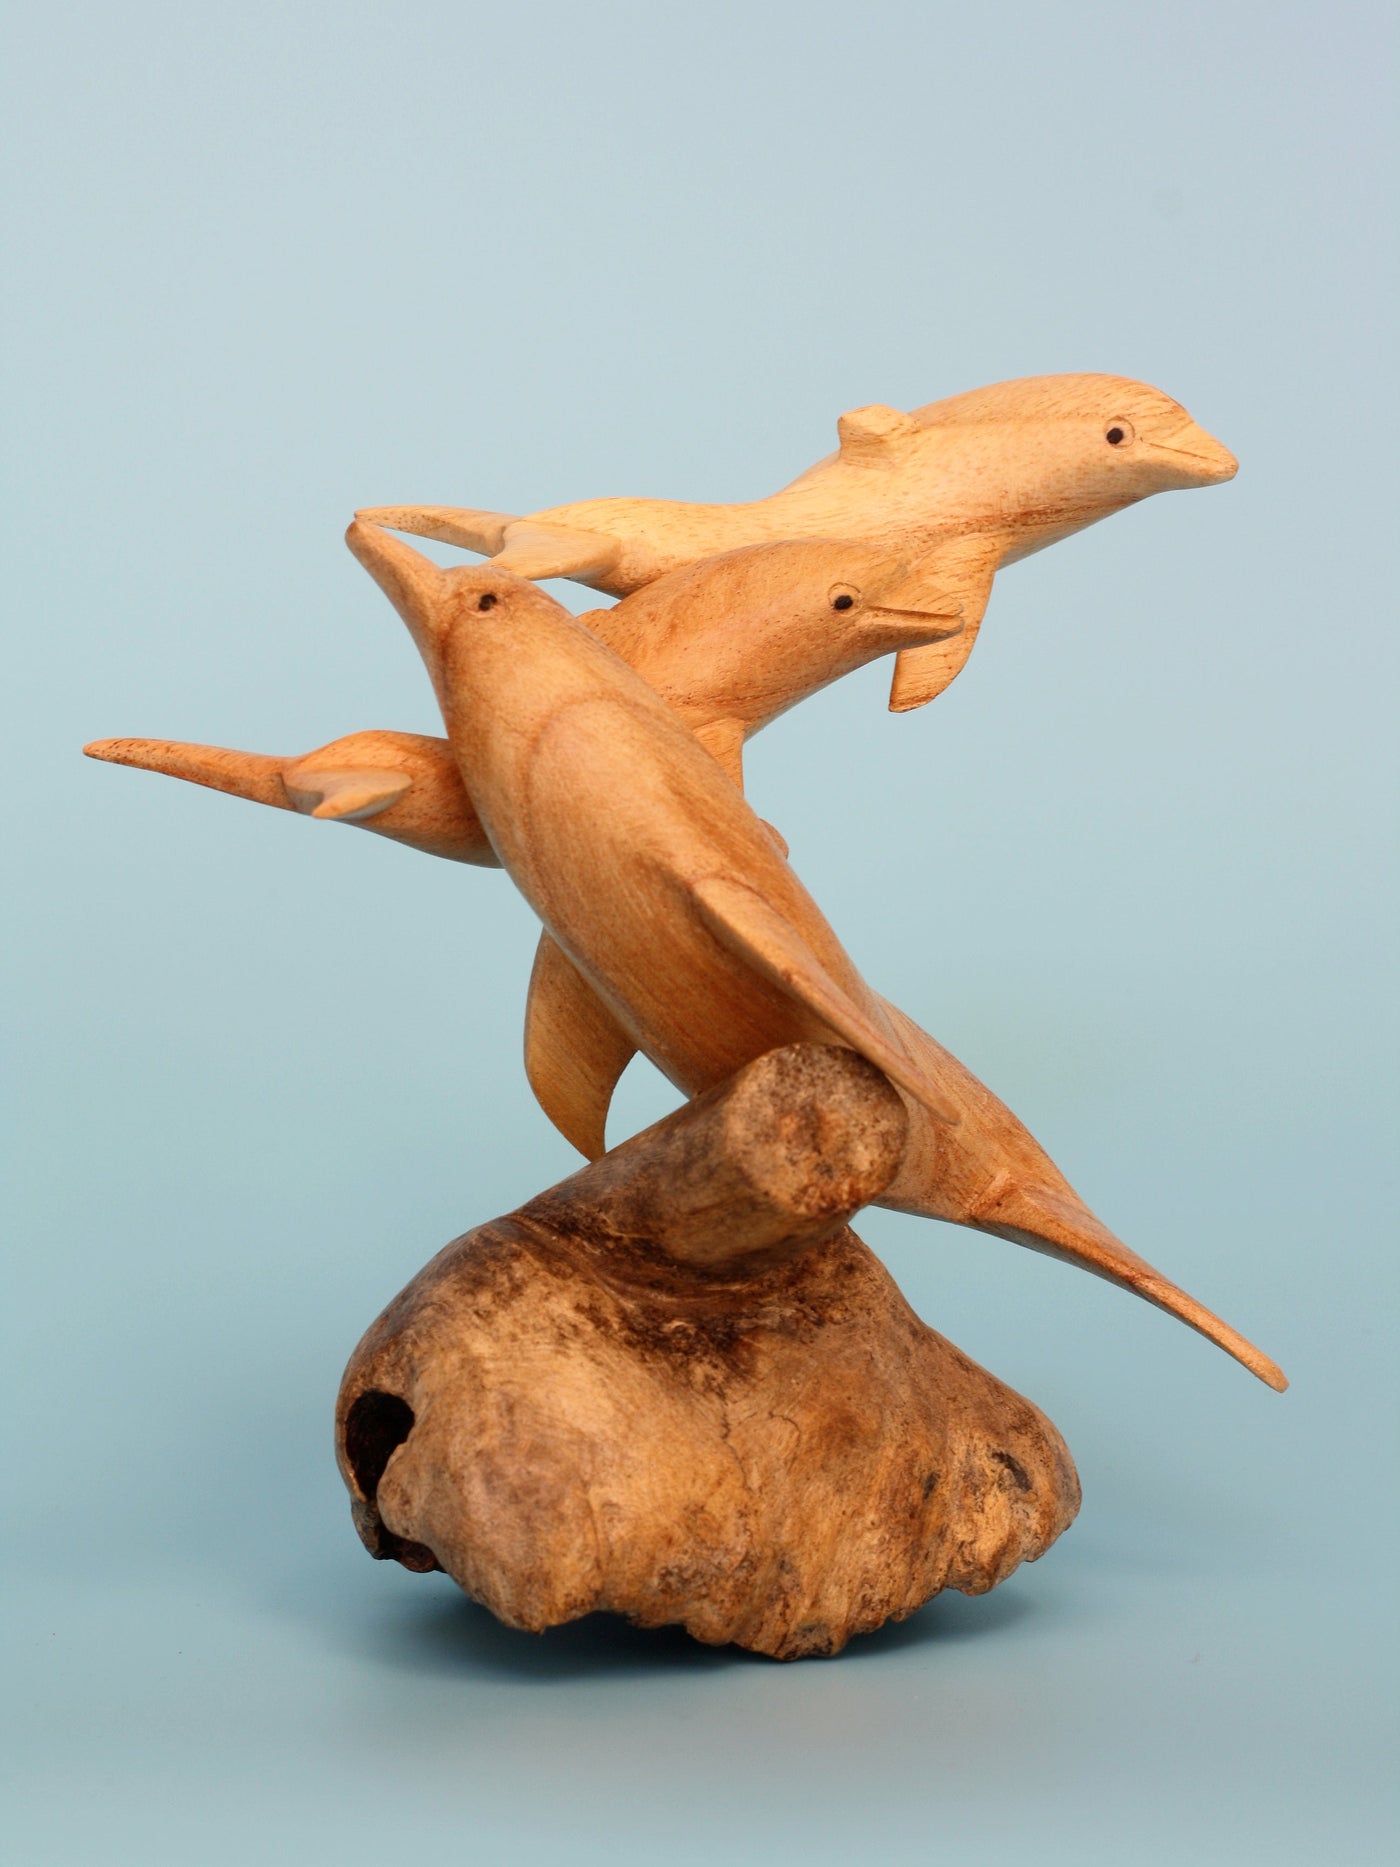 Wooden Hand Carved 3 Dolphins Statue Sculpture Wood Decorative Home Decor Accent Fish Figurine Handcrafted Handmade Tropical Nautical Ocean Coastal